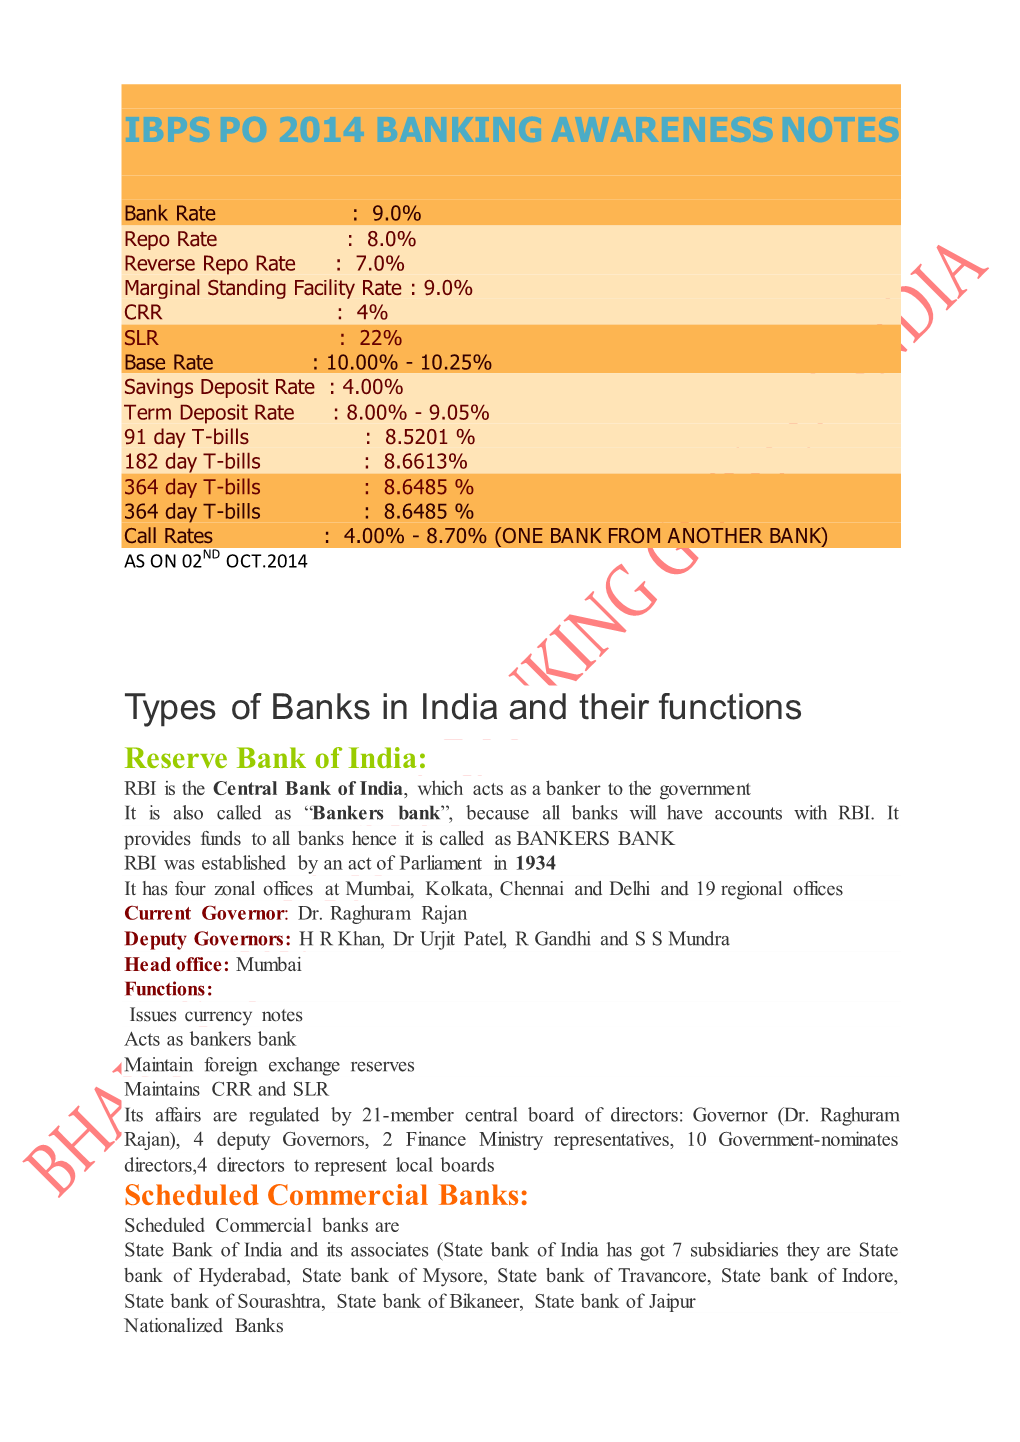 Types of Banks in India and Their Functions